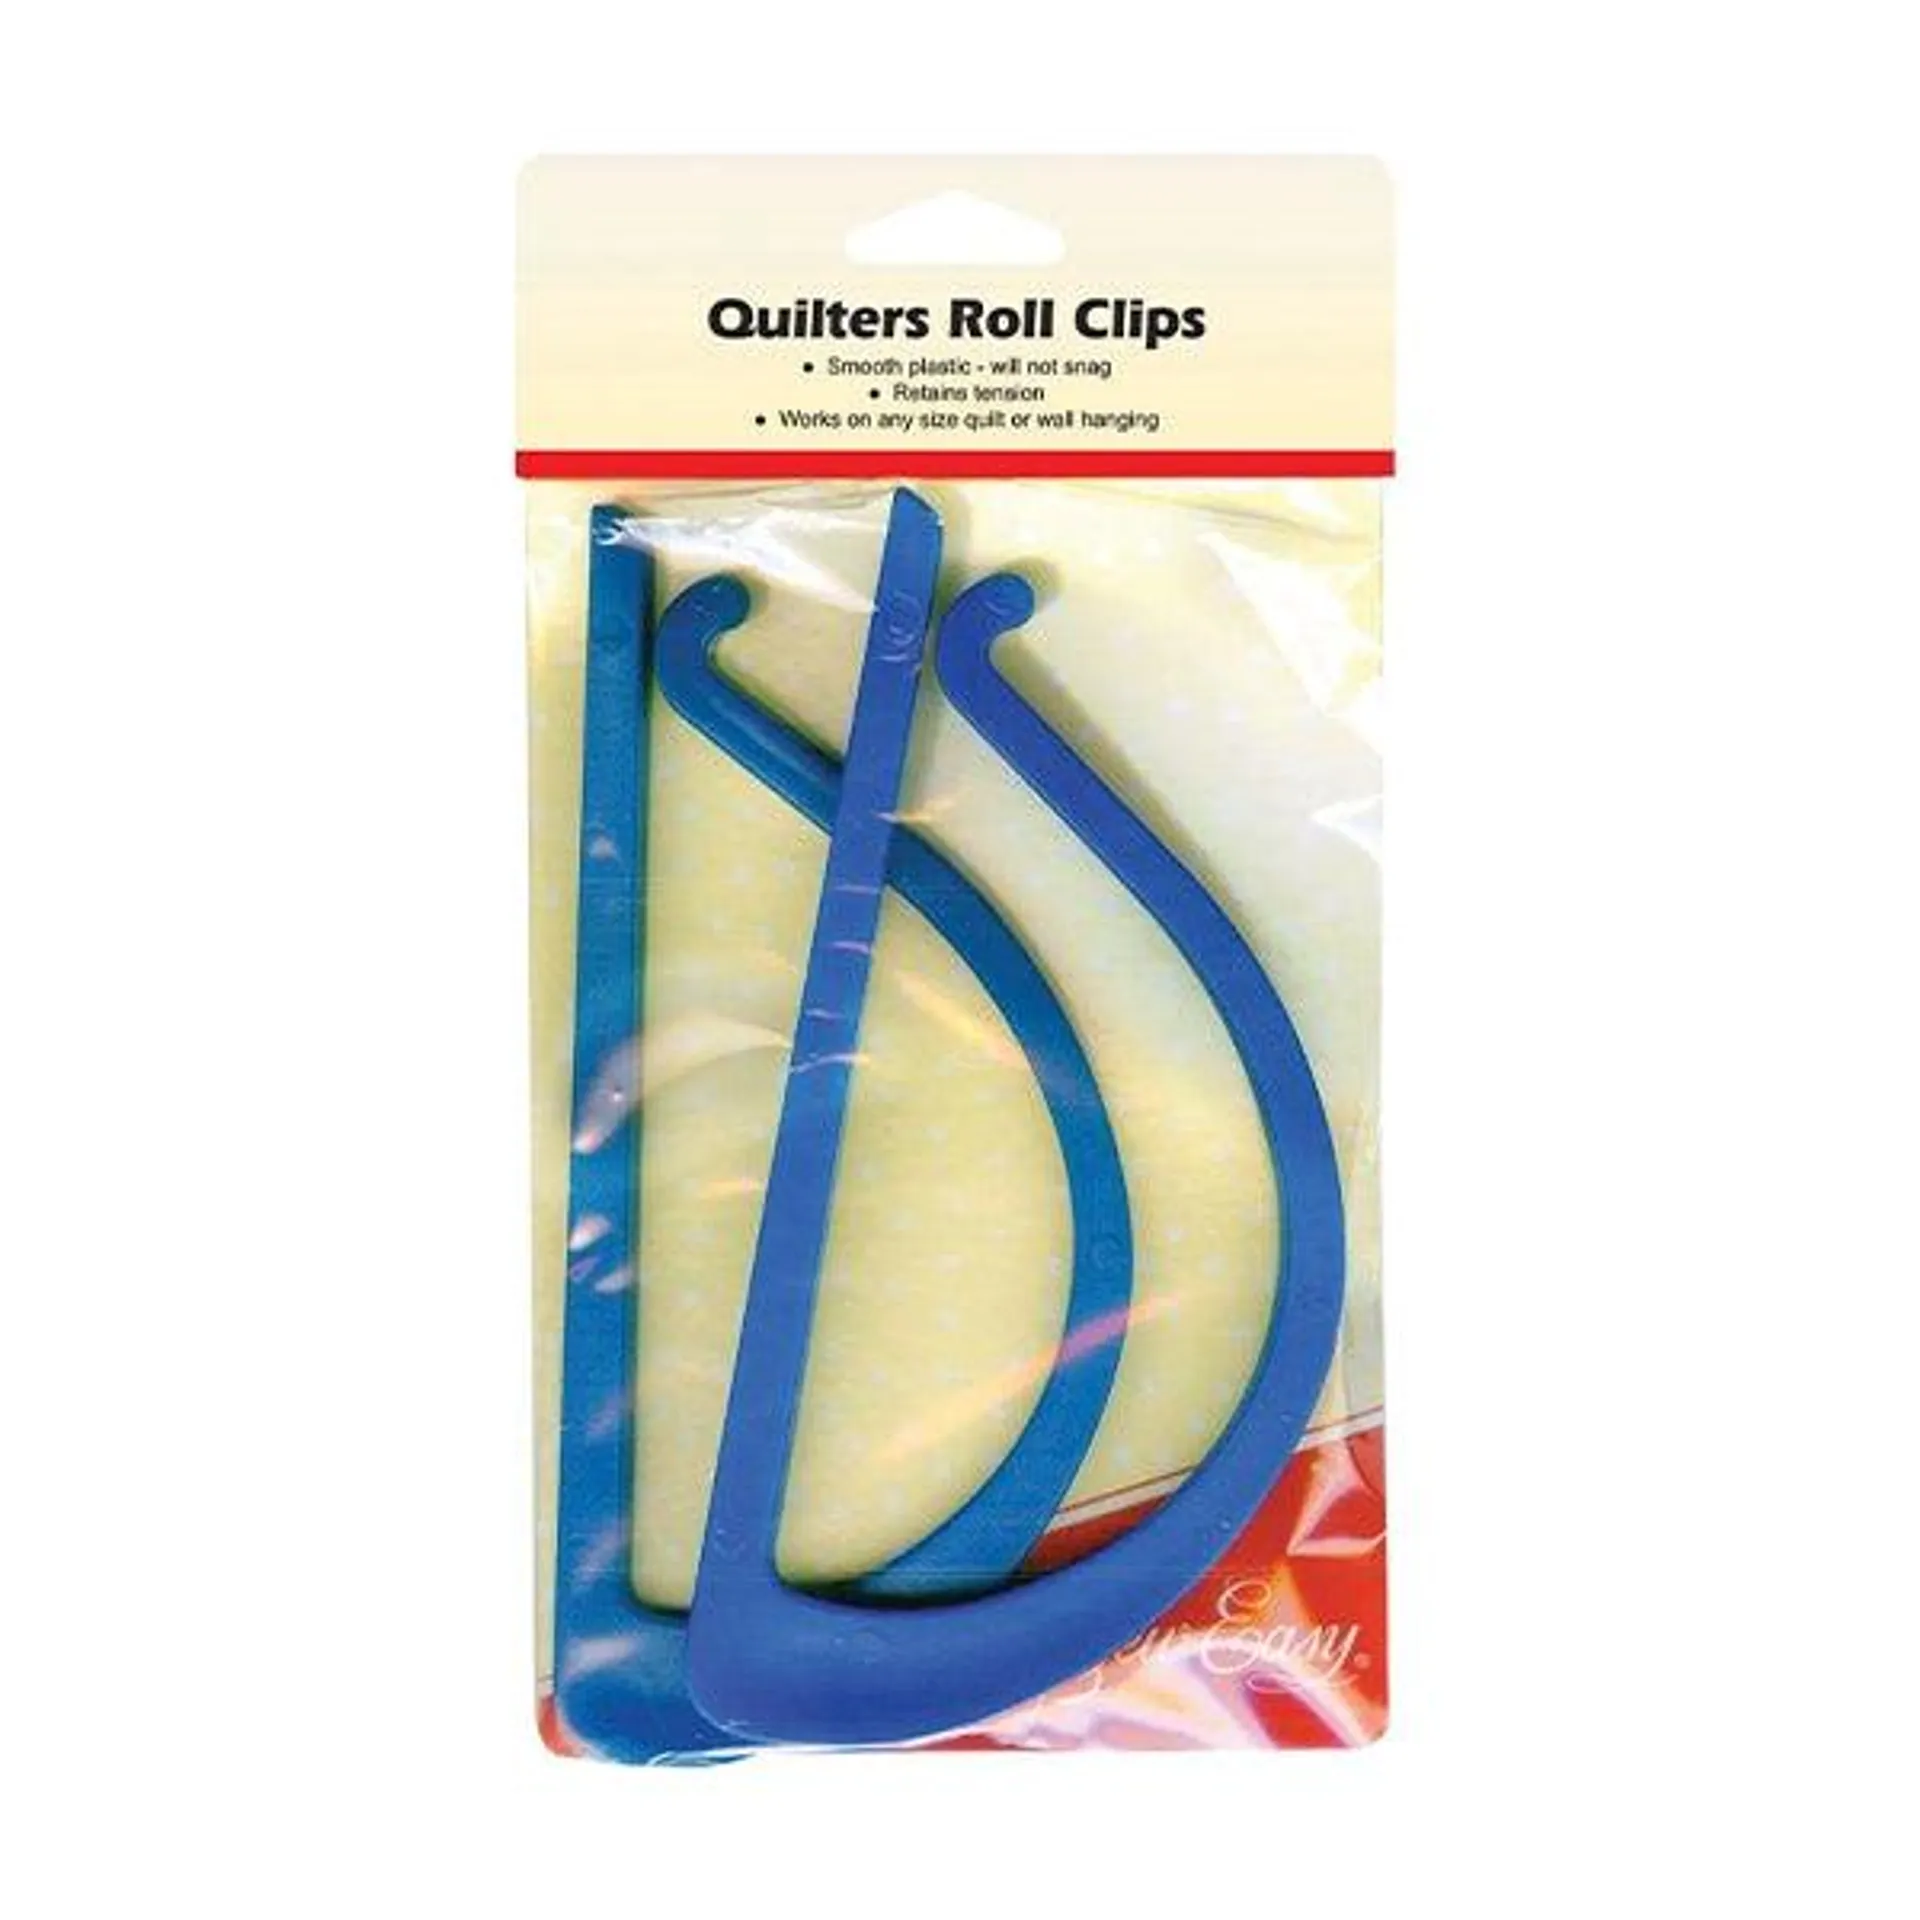 Quilter's Roll Clips